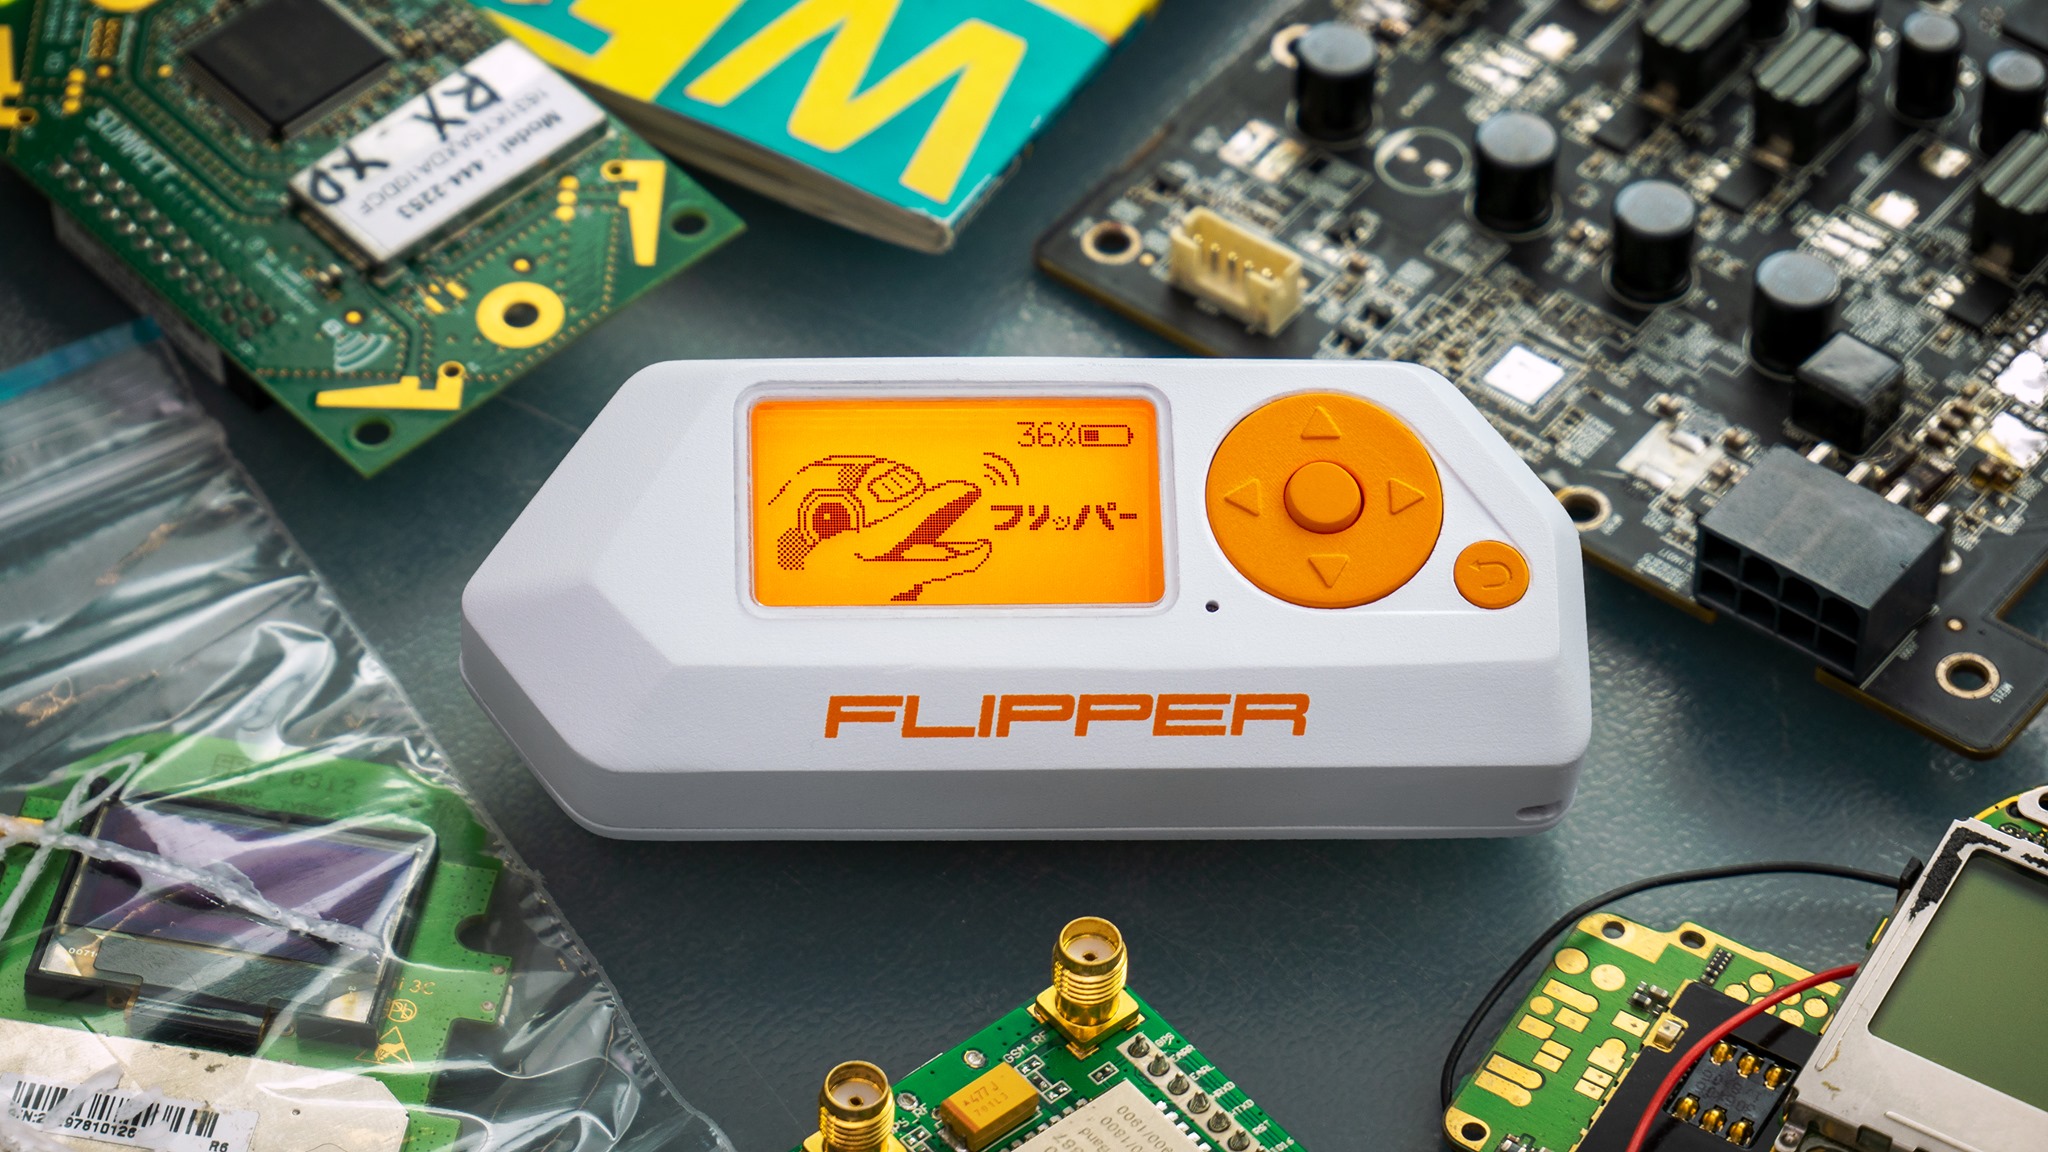 Hacker Uncovers How to Turn Traffic Lights Green With Flipper Zero